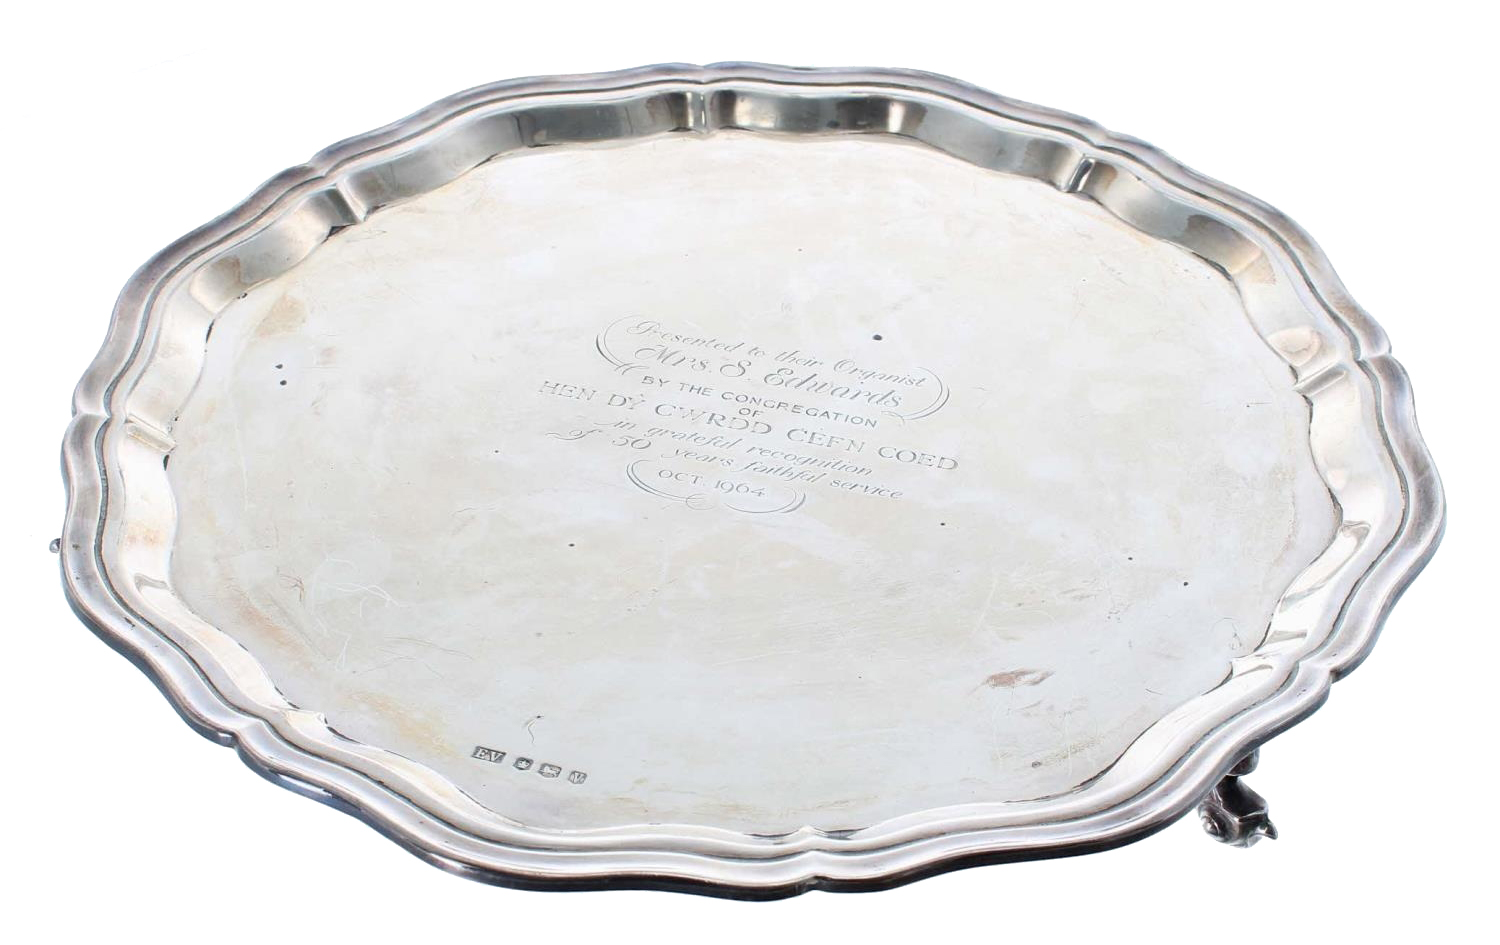 Viner's Ltd. circular silver salver, with moulded shaped rim, raised on three scroll feet, Sheffield